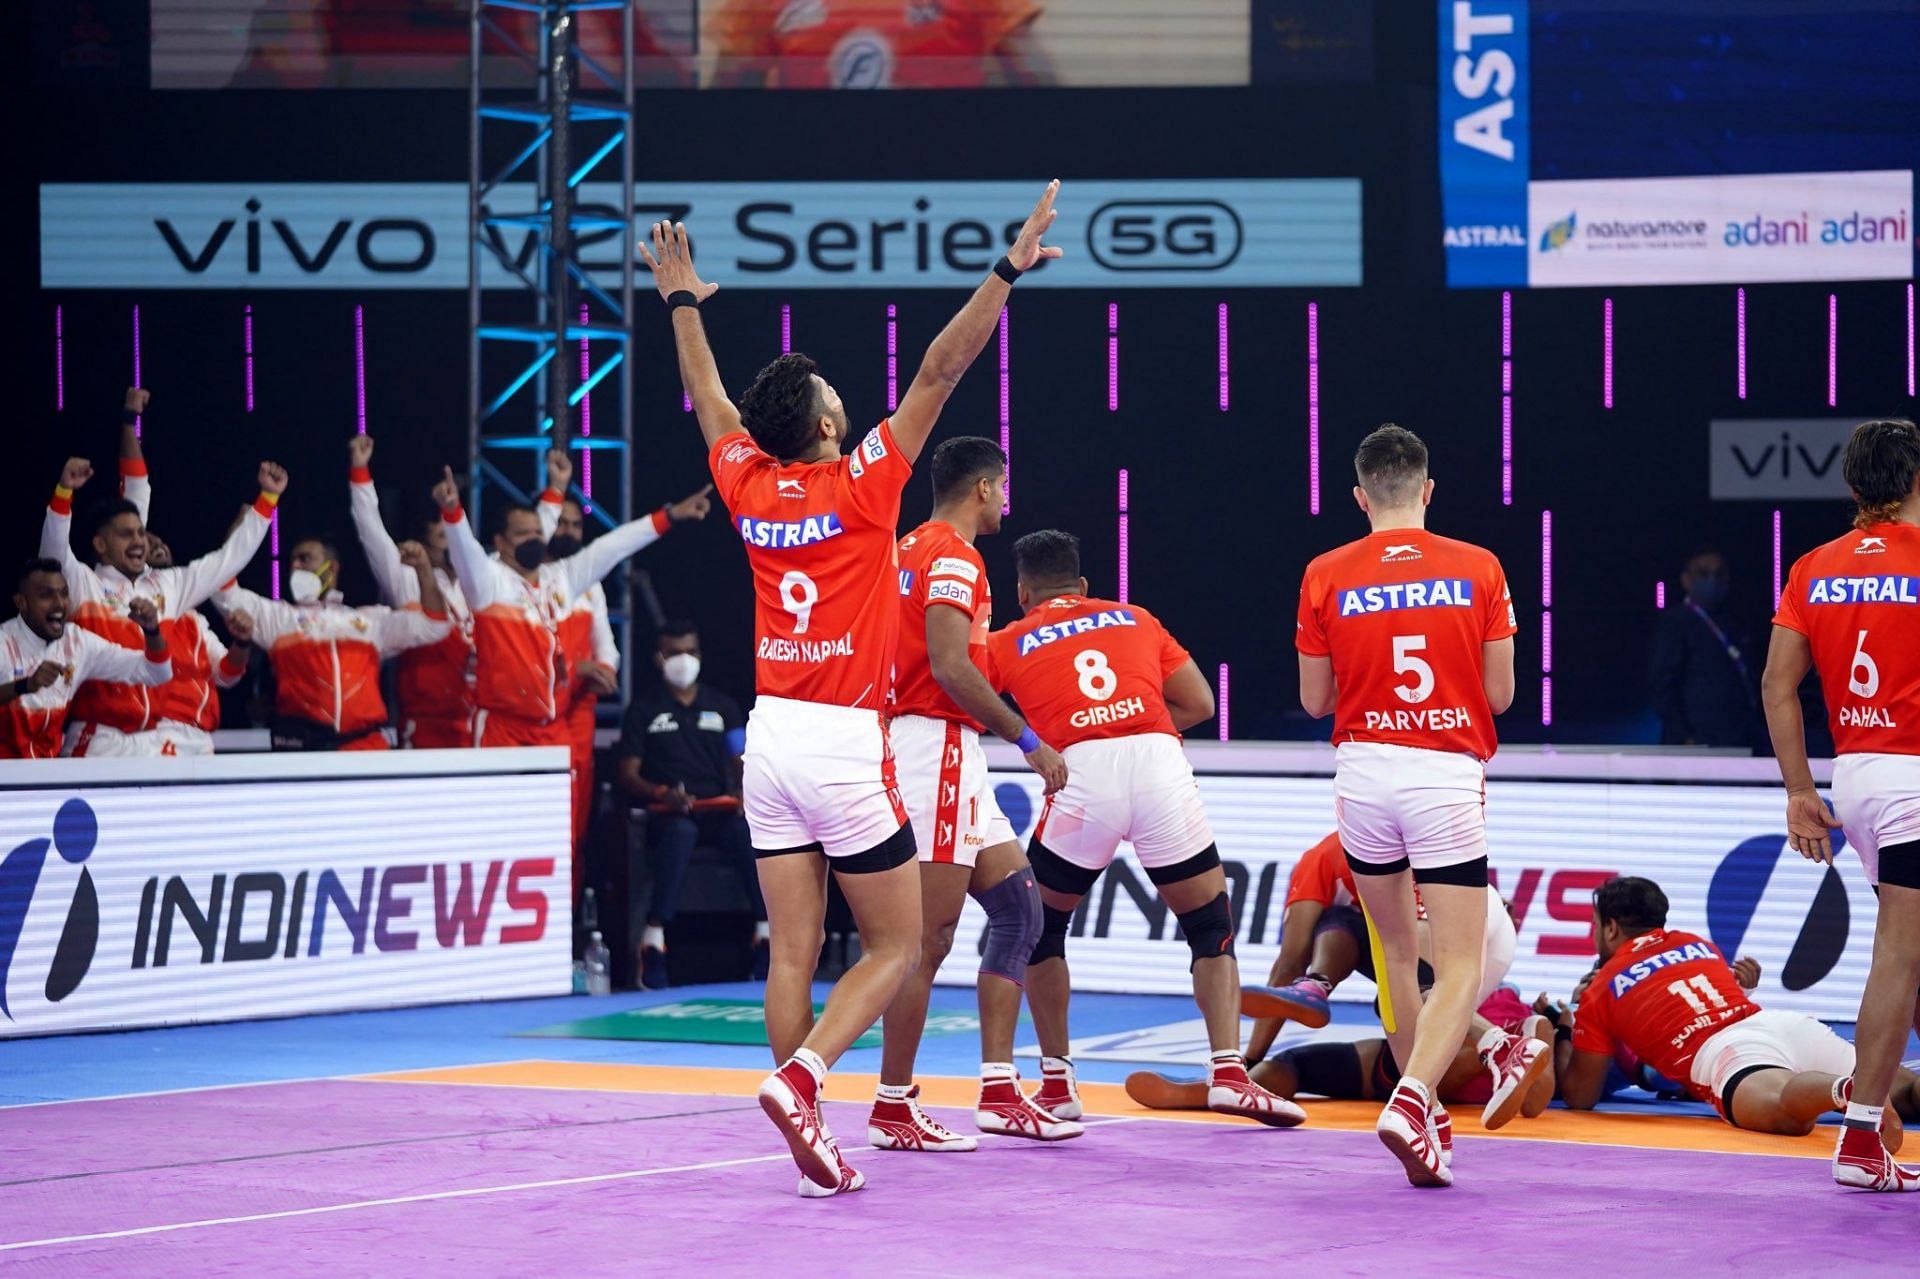 Gujarat Giants&#039; players celebrate after a successful tackle - Image Courtesy: Twitter